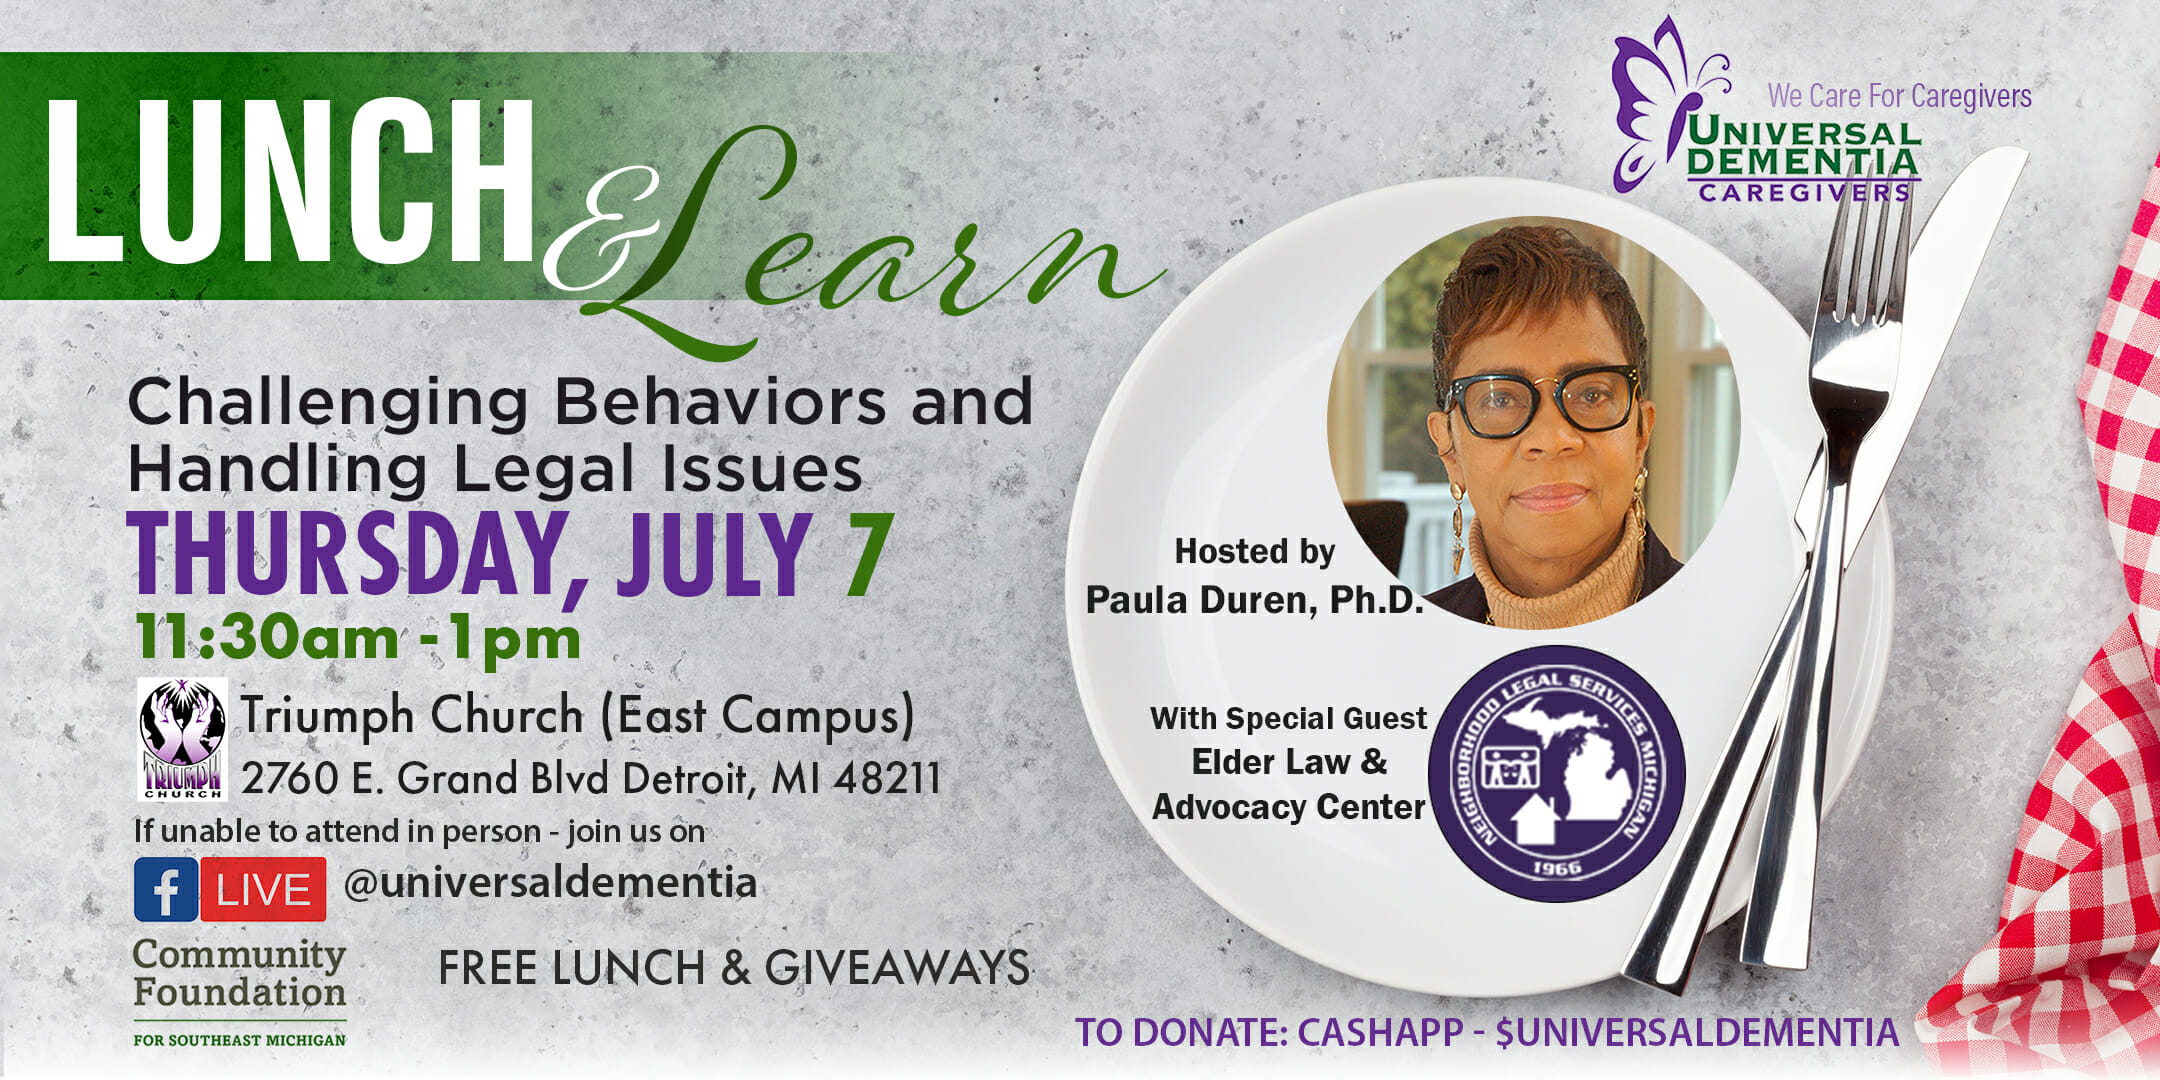 Lunch and Learn event